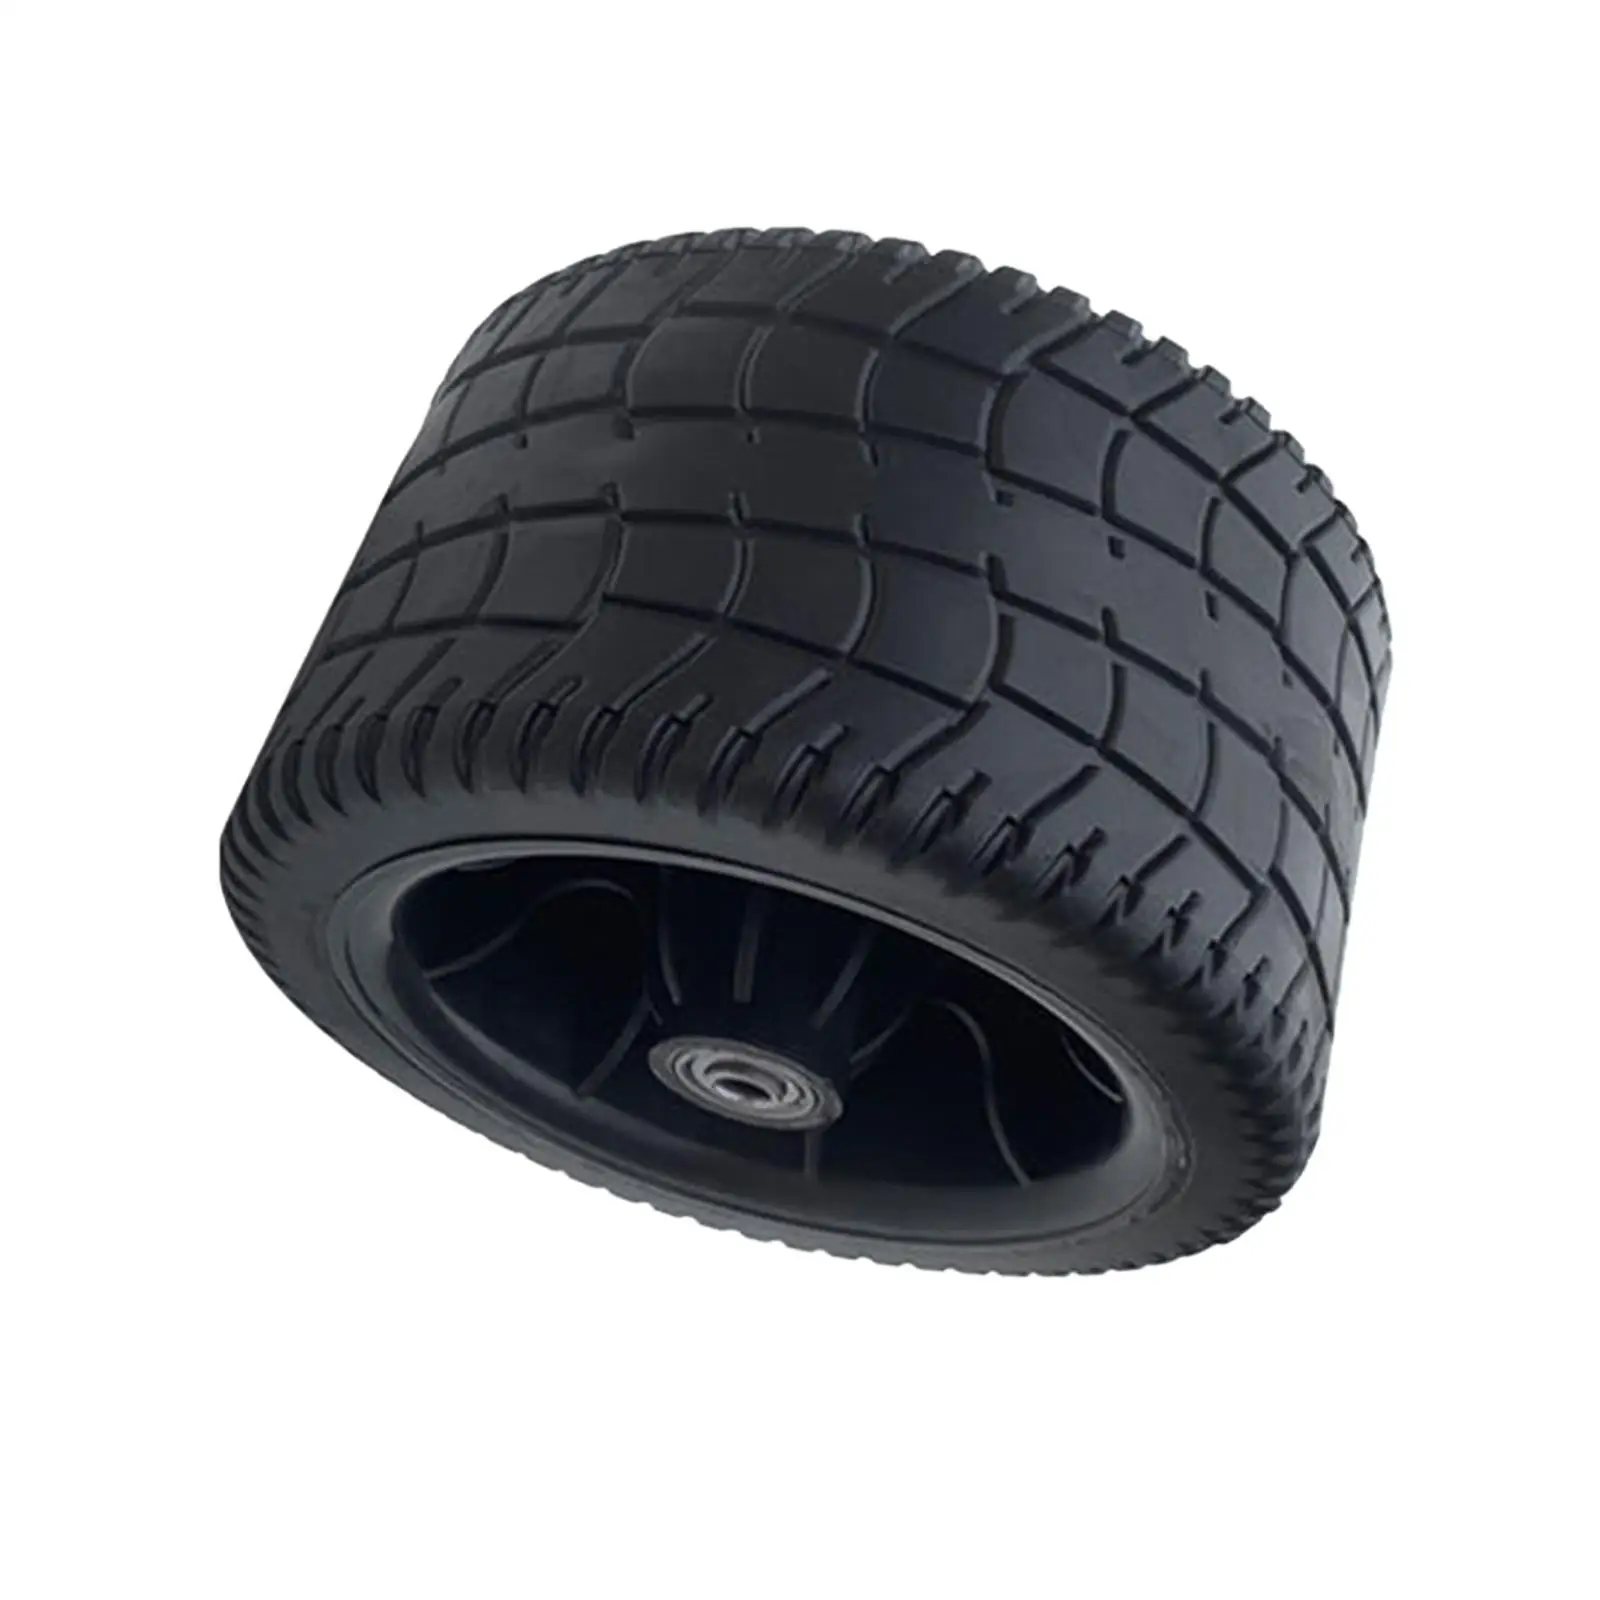 4inch Wide Wagon Cart Wheel PP Tires Sturdy Smooth Rolling Diameter 6.3inch for Shopping Cart